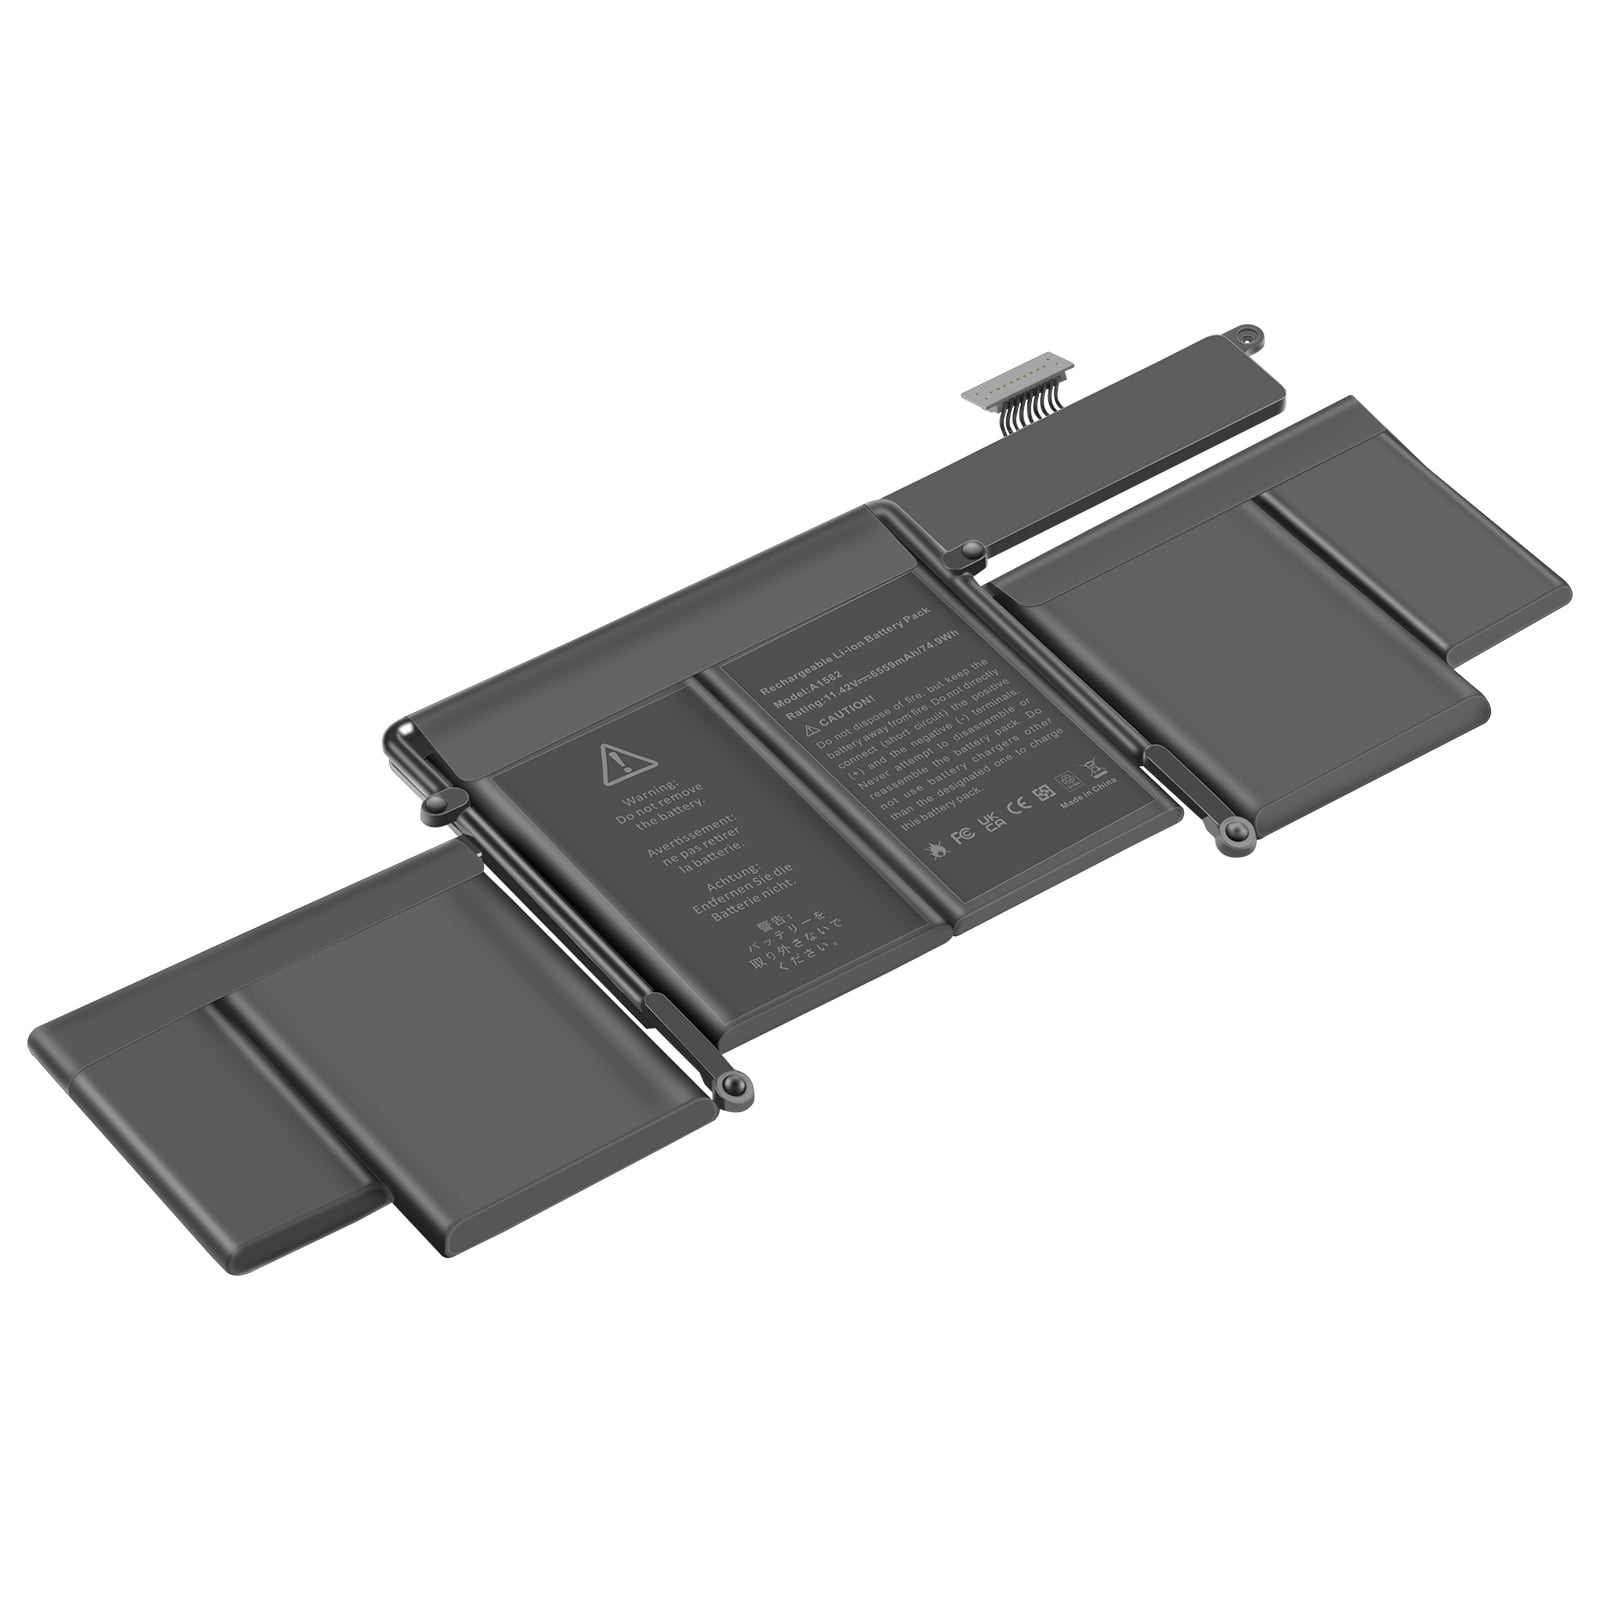 A1582 A1502 Battery for Mac-Book Pro Battery 13'' Late 2013, Mid 2014, Early A1493 A1582 A1502 Battery - Walmart.com